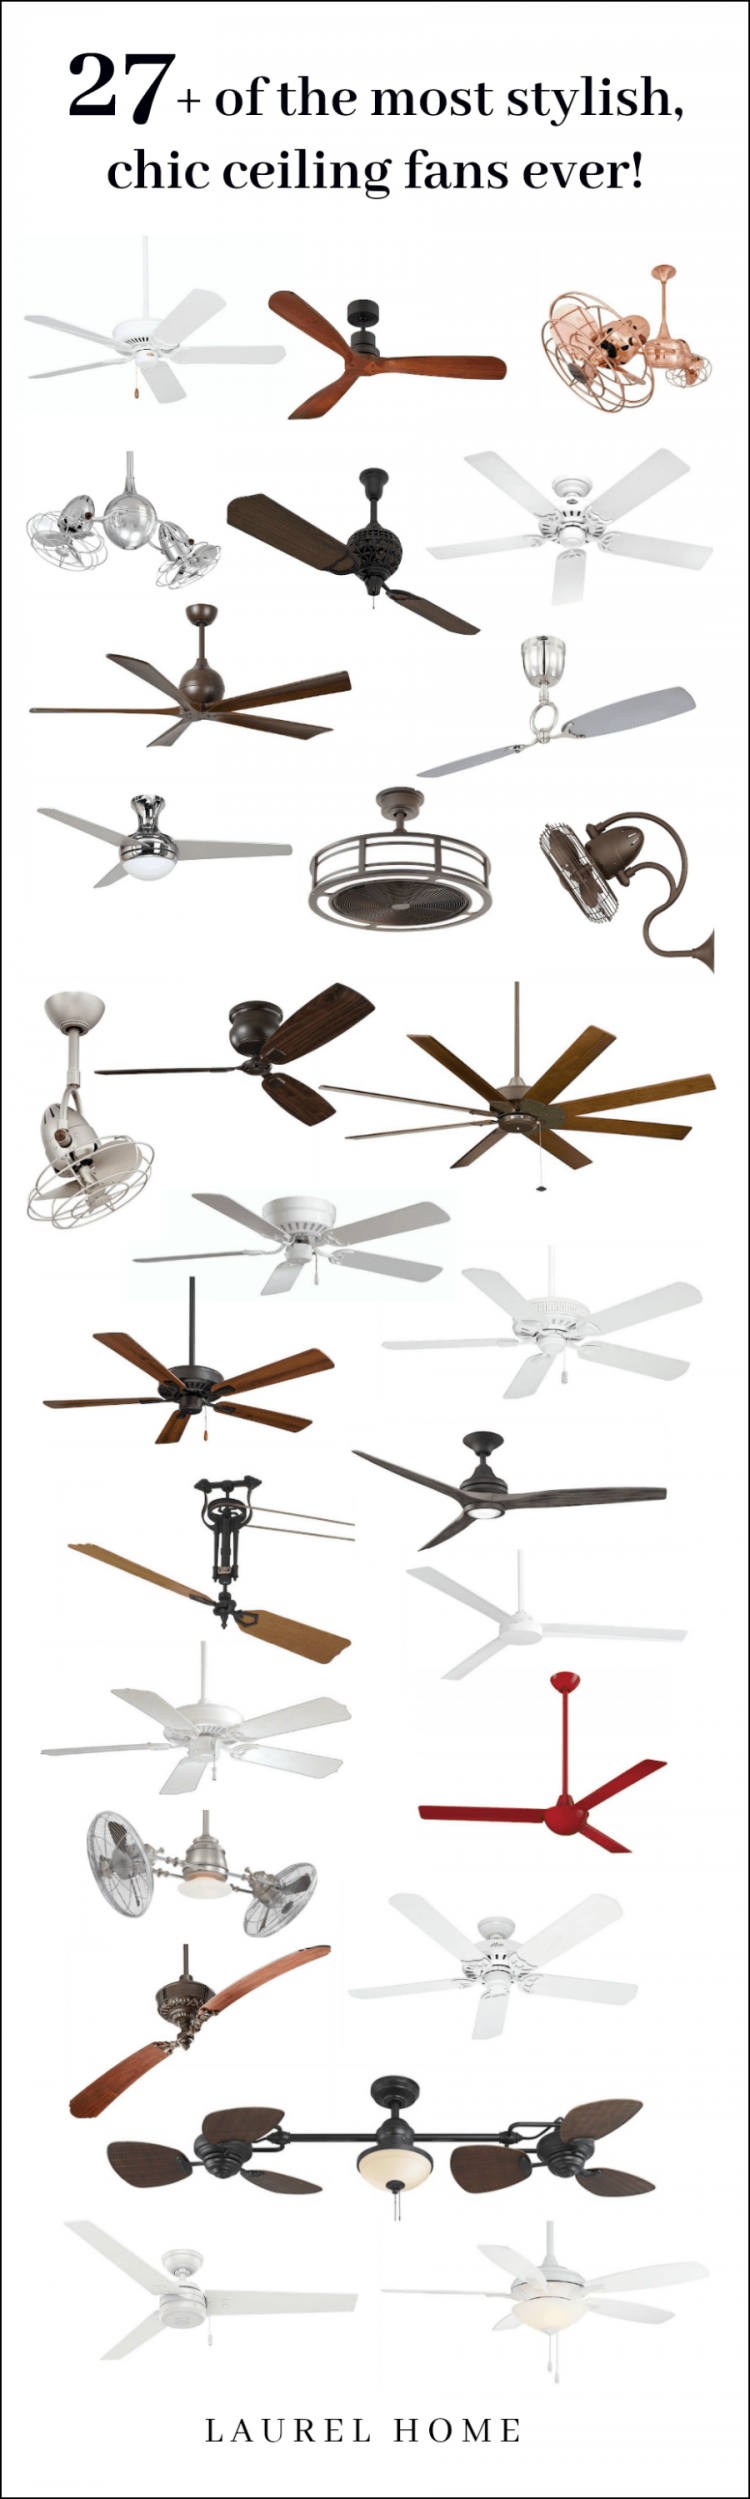 27 chic, stylish ceiling fans